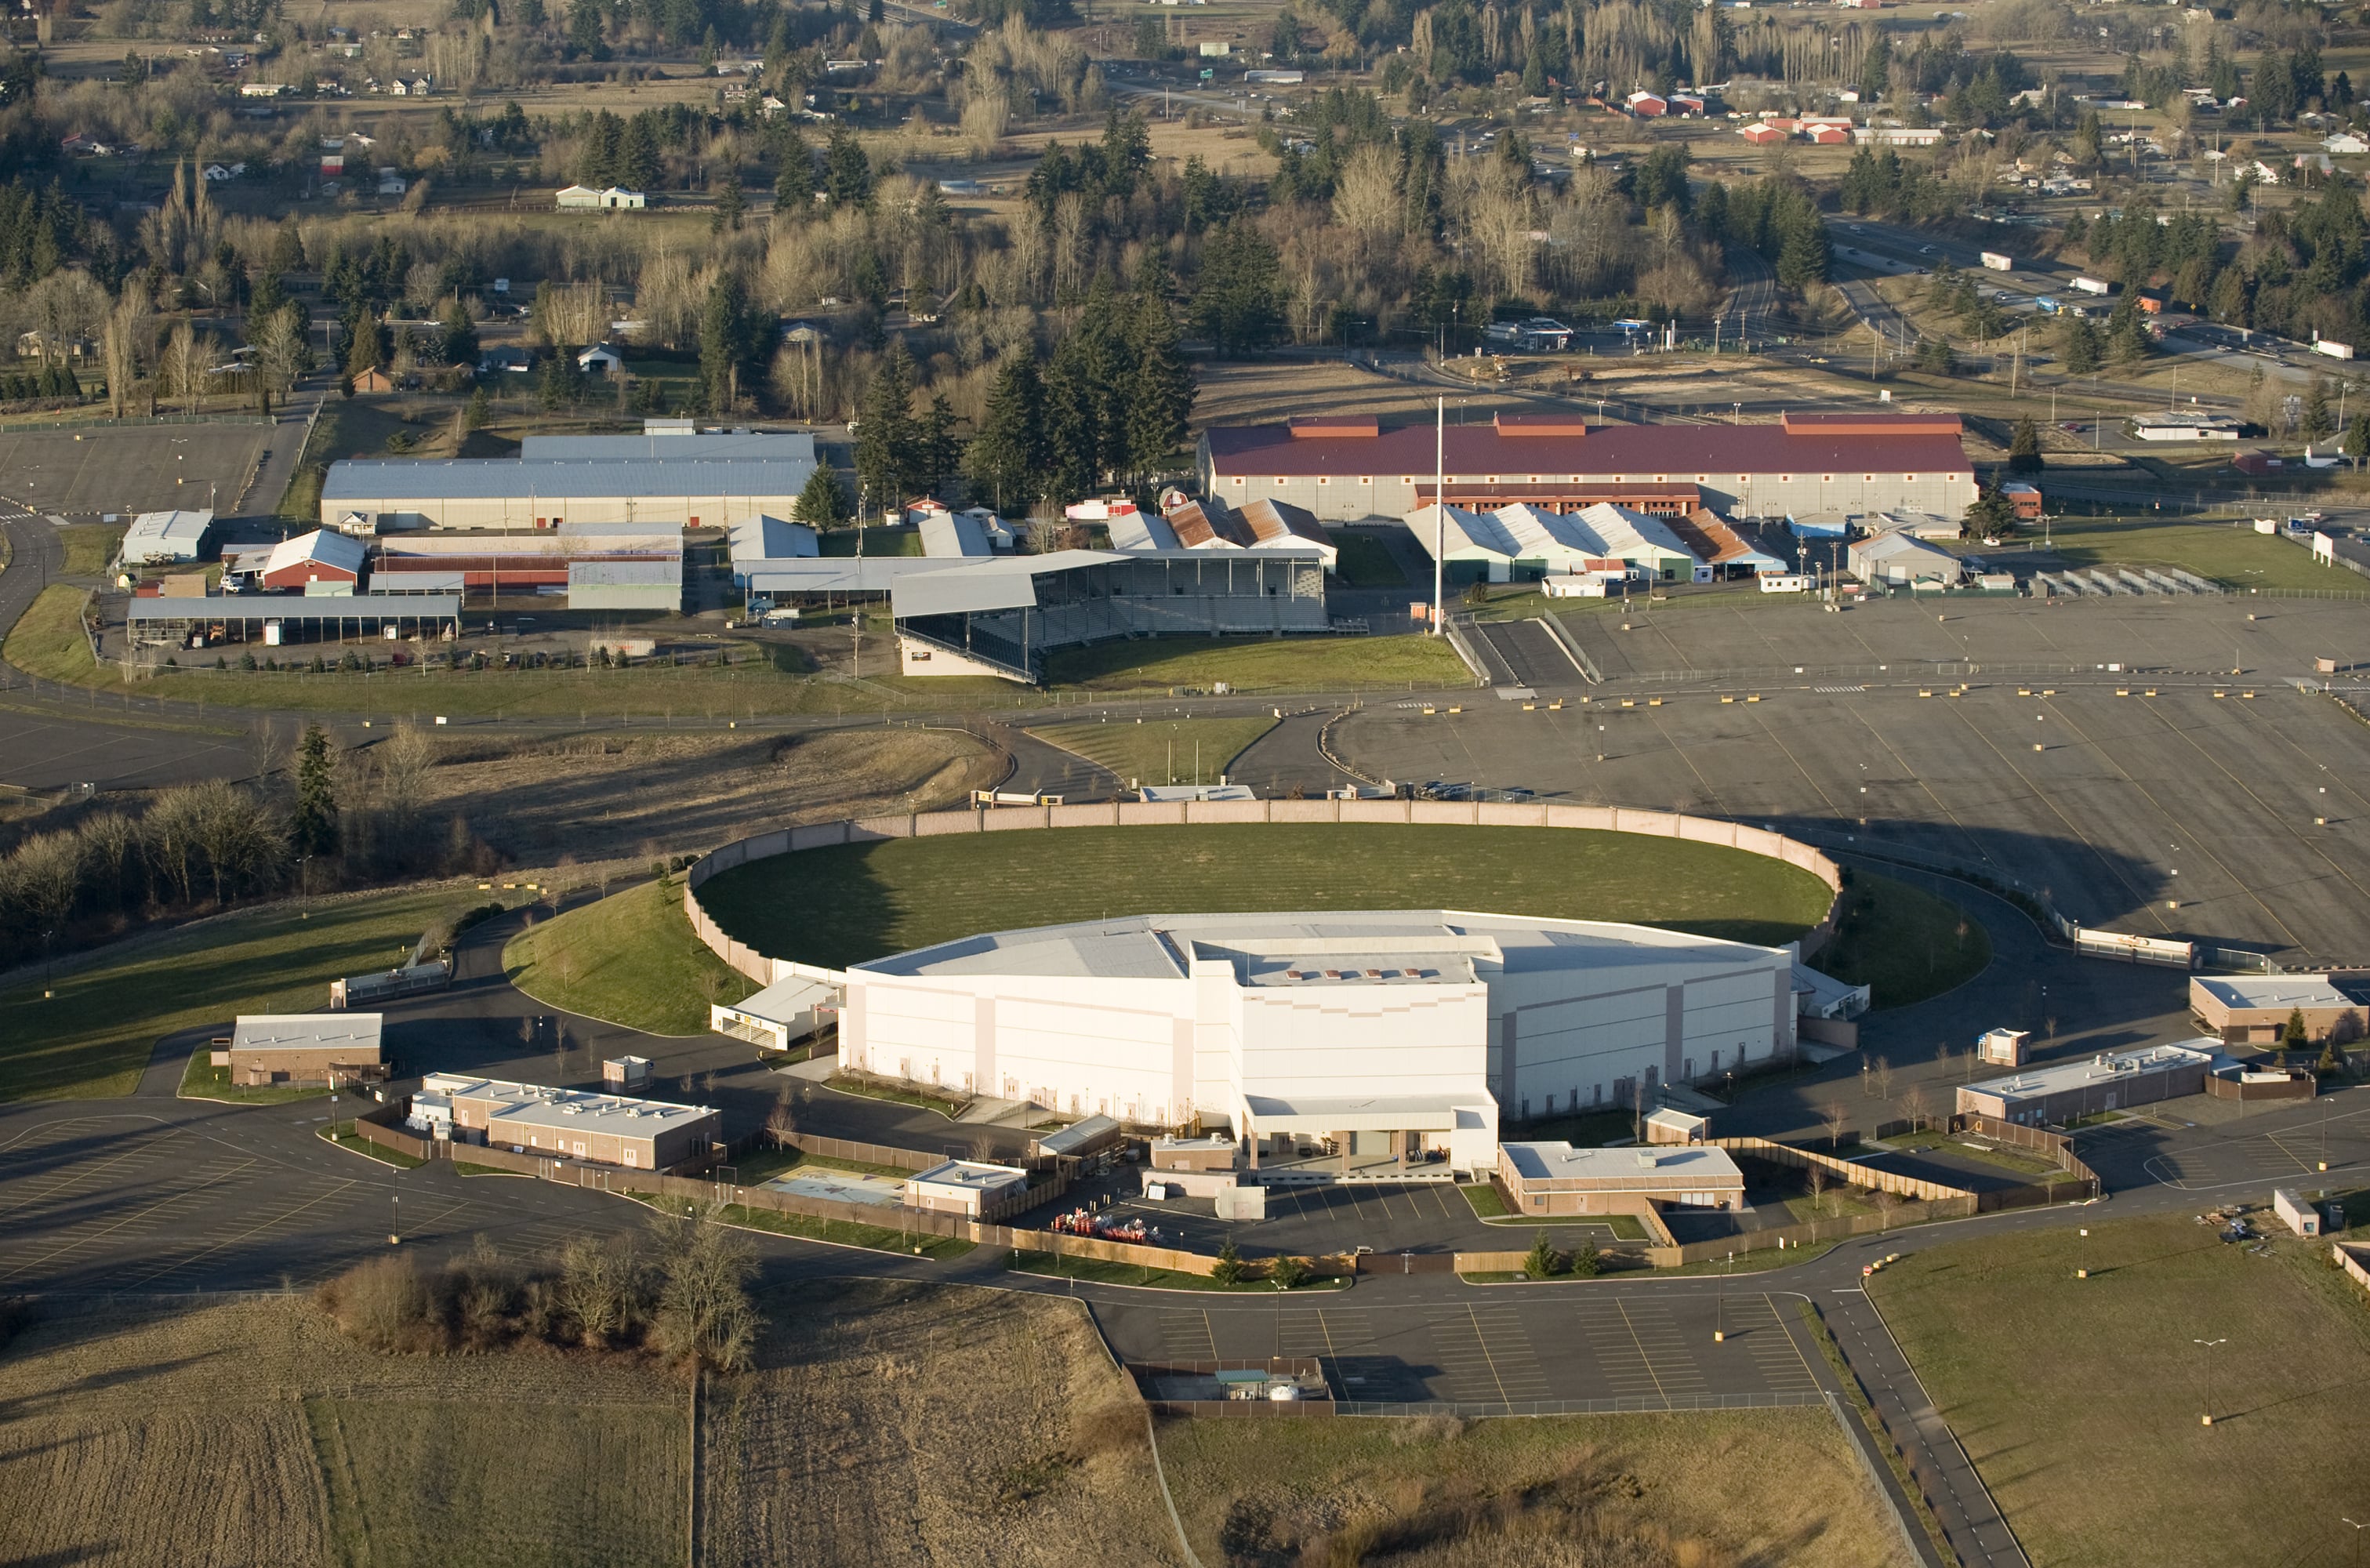 An aerial photograph of the Sunlight Supply Amphitheater at the Clark County Fairgrounds.